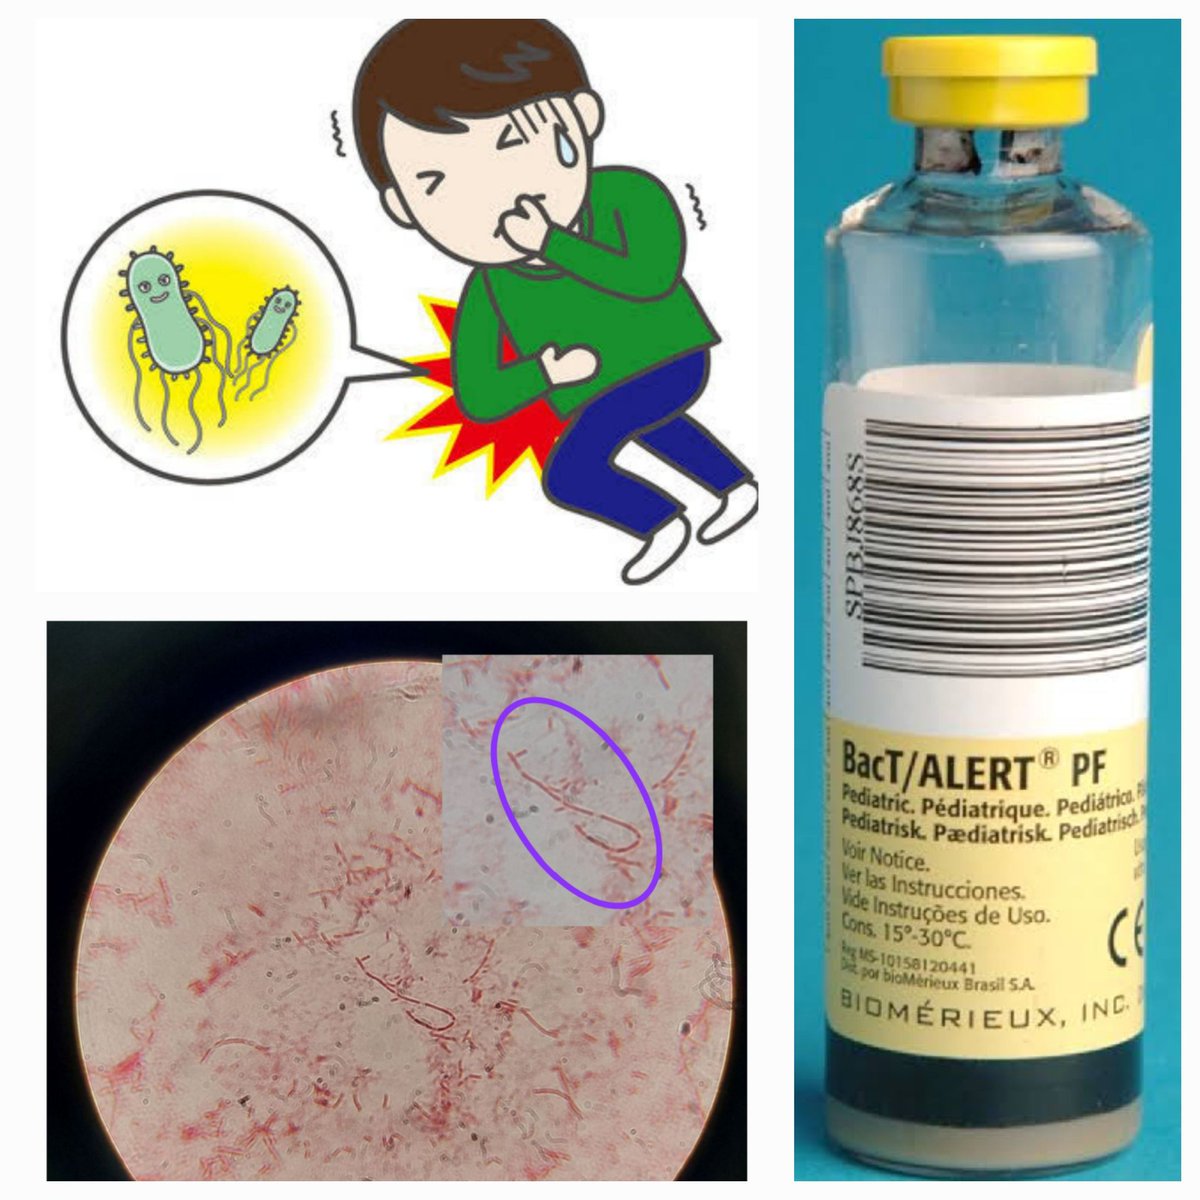 Microsthethoscope Series

Diagnosed a case of enteric fever from microbiology within 4 hours without agar plates 🧫and molecular tests🧬, read how👇

shorturl.at/EtXd4

#microsthethoscope #IDTwitter #medTwitter #clinicalmicrobiology